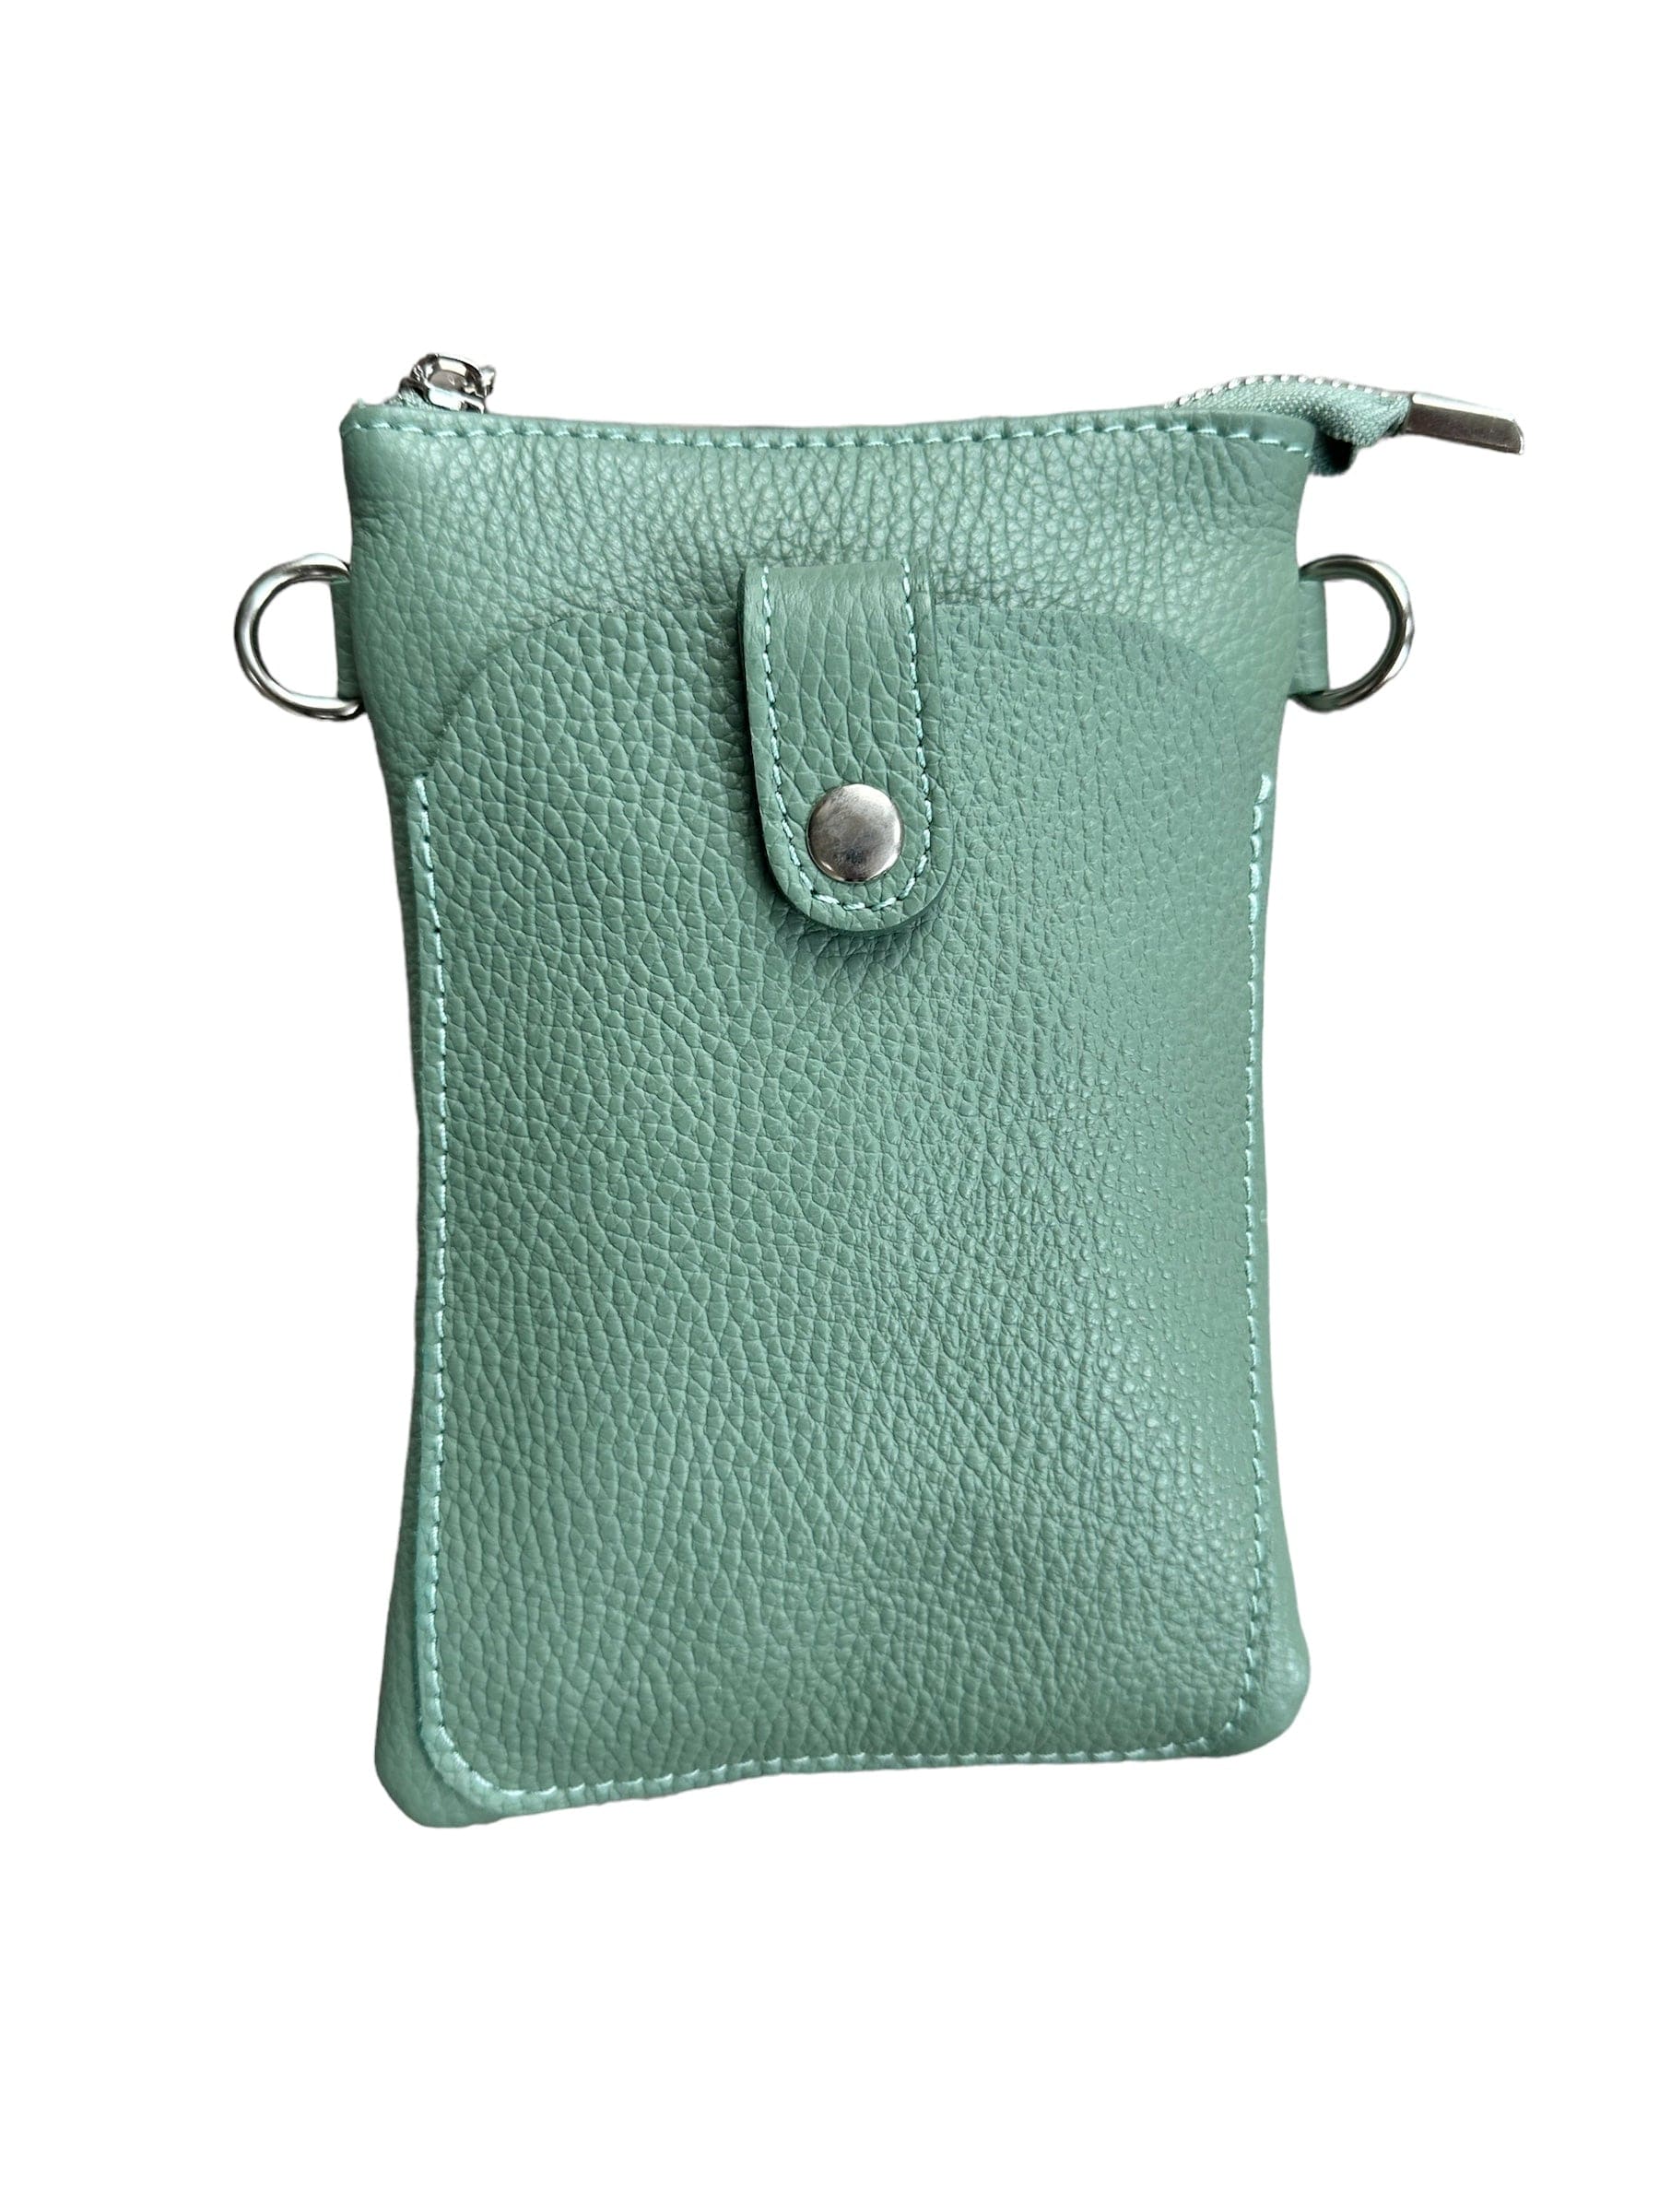 lusciousscarves Sage Green Small Italian Leather Crossbody Phone Bag , Available in 12 Colours